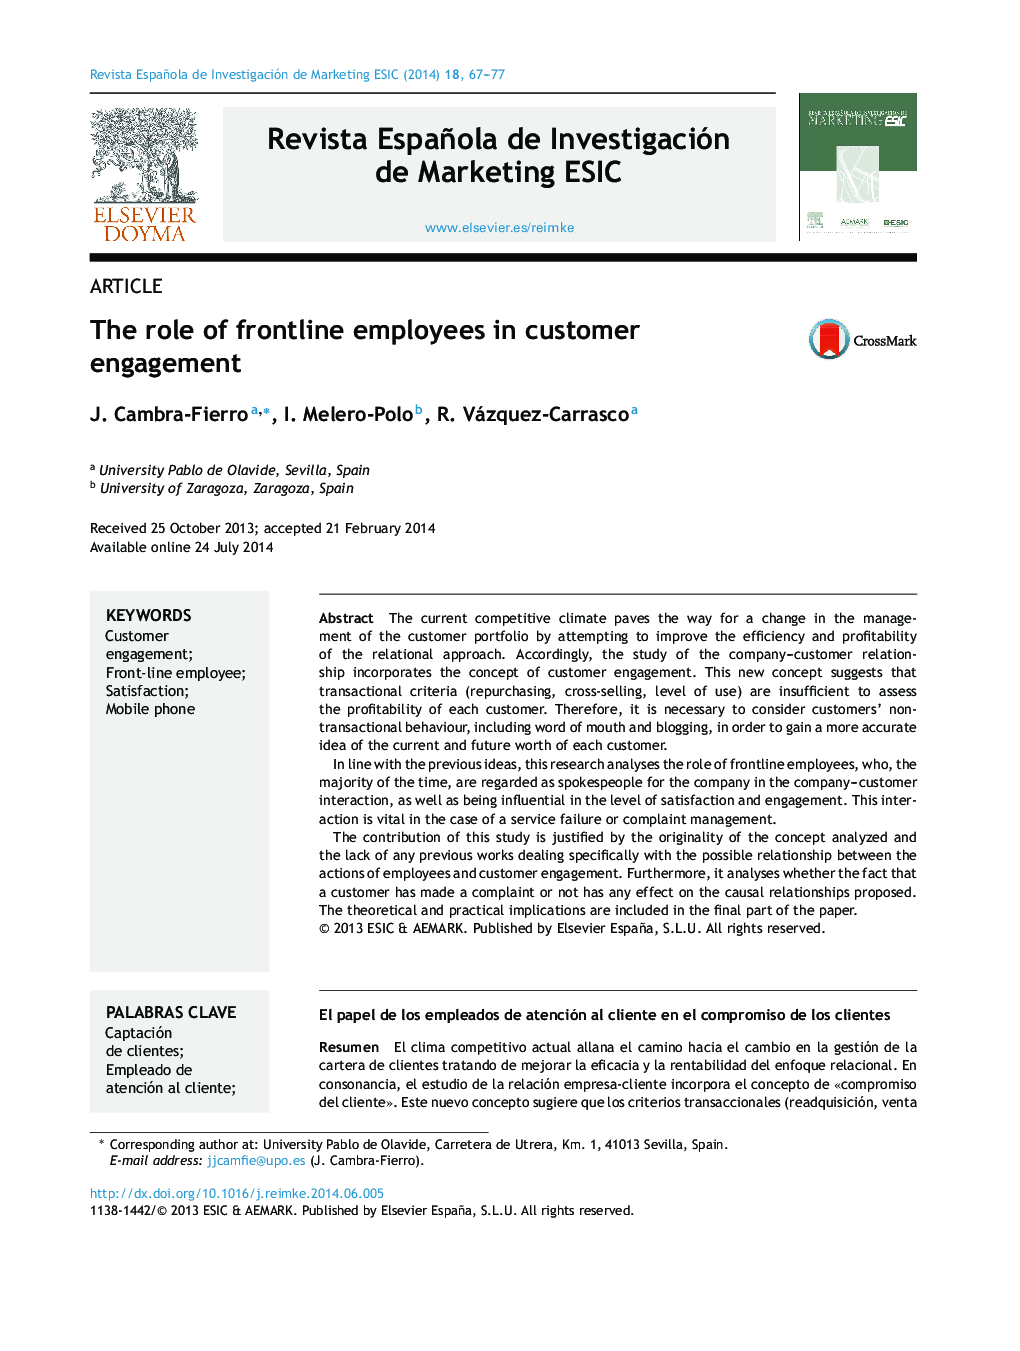 The role of frontline employees in customer engagement